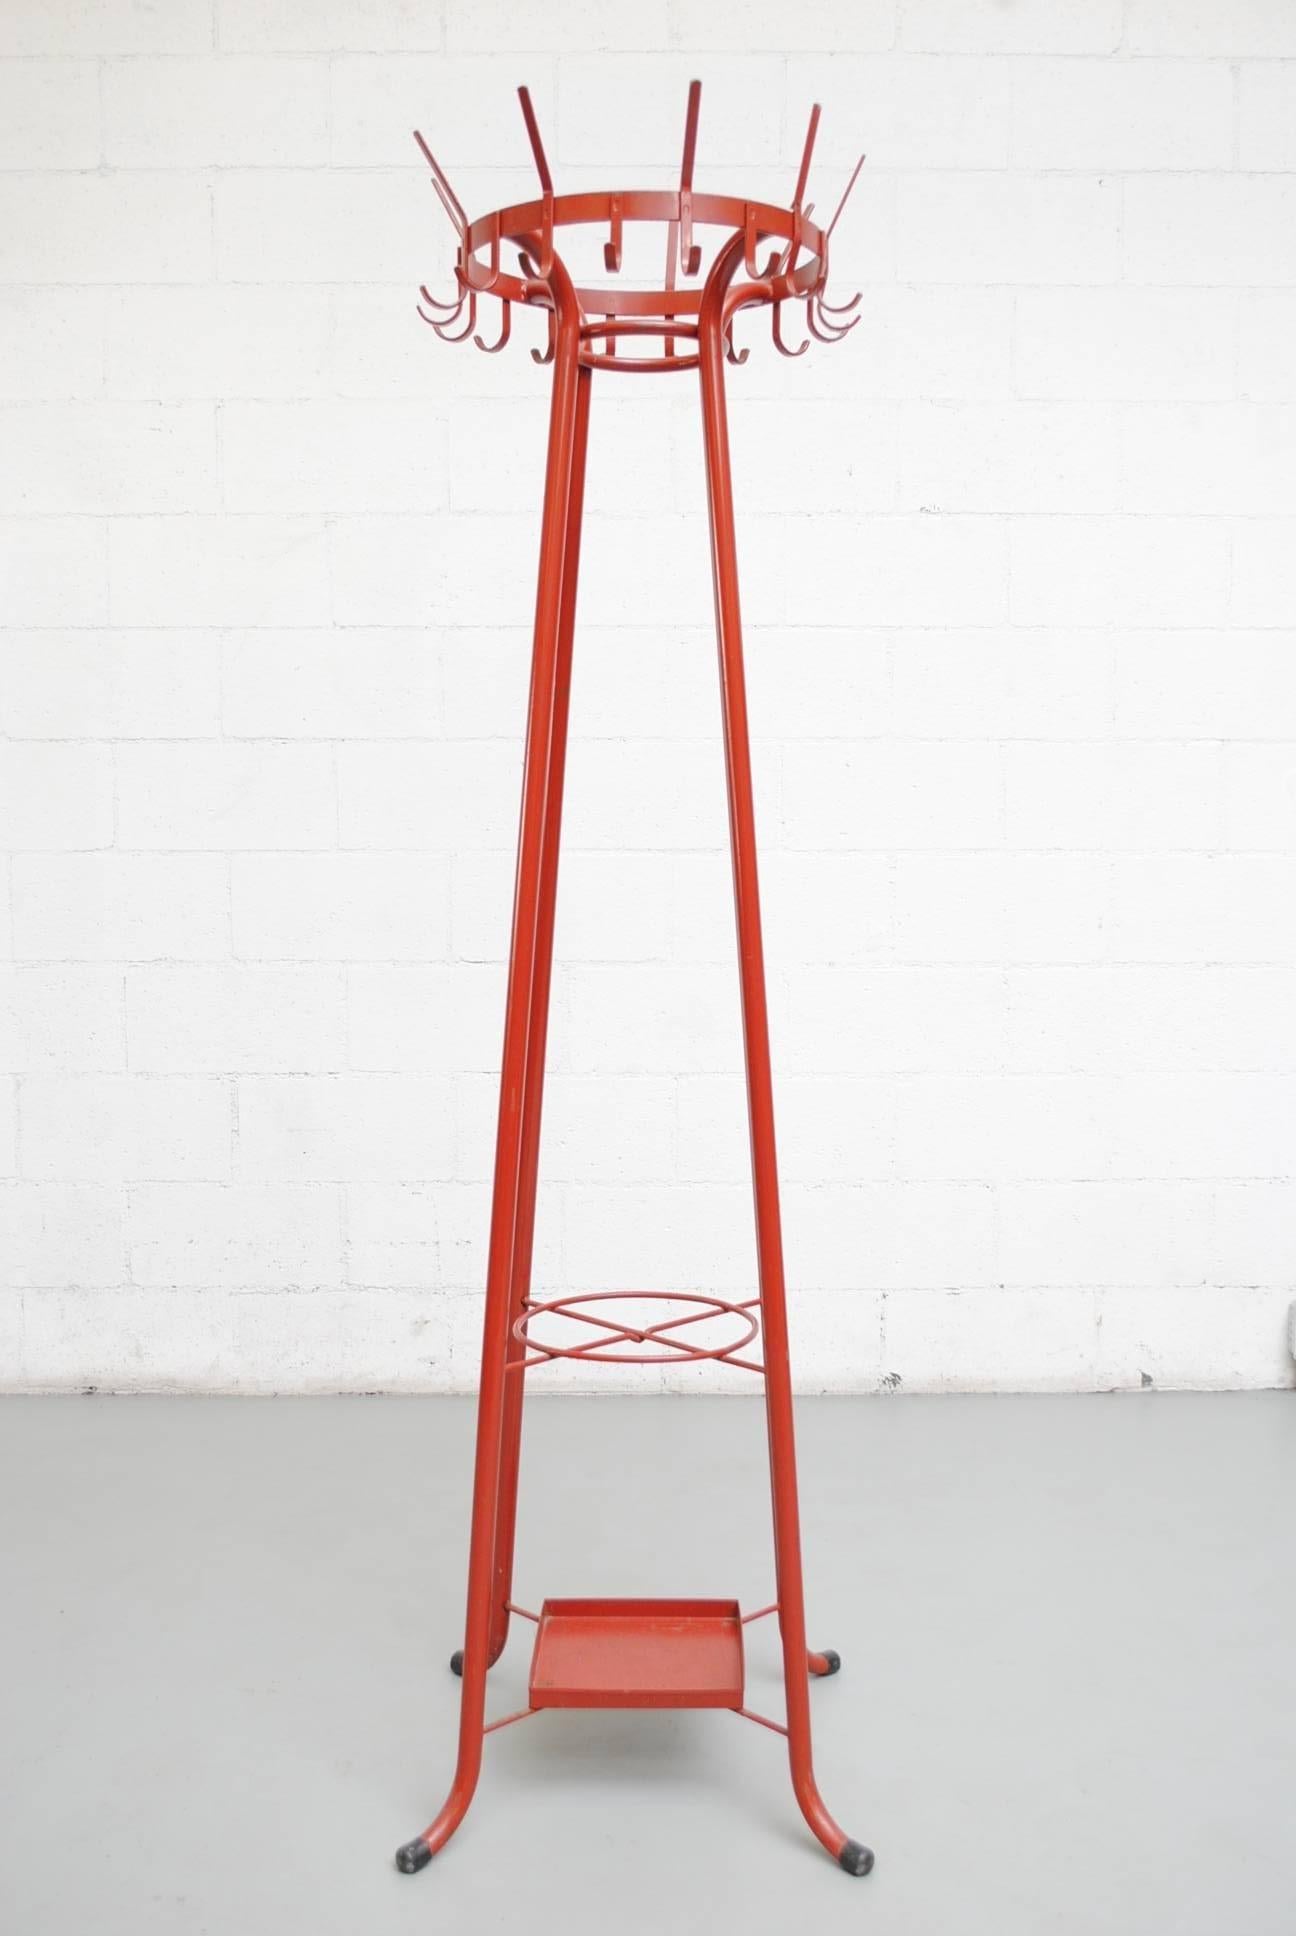 Bright red enameled metal institutional standing coat rack with built in umbrella stand. Impressive design and color. In original condition with visible wear consistent with its age and usage.